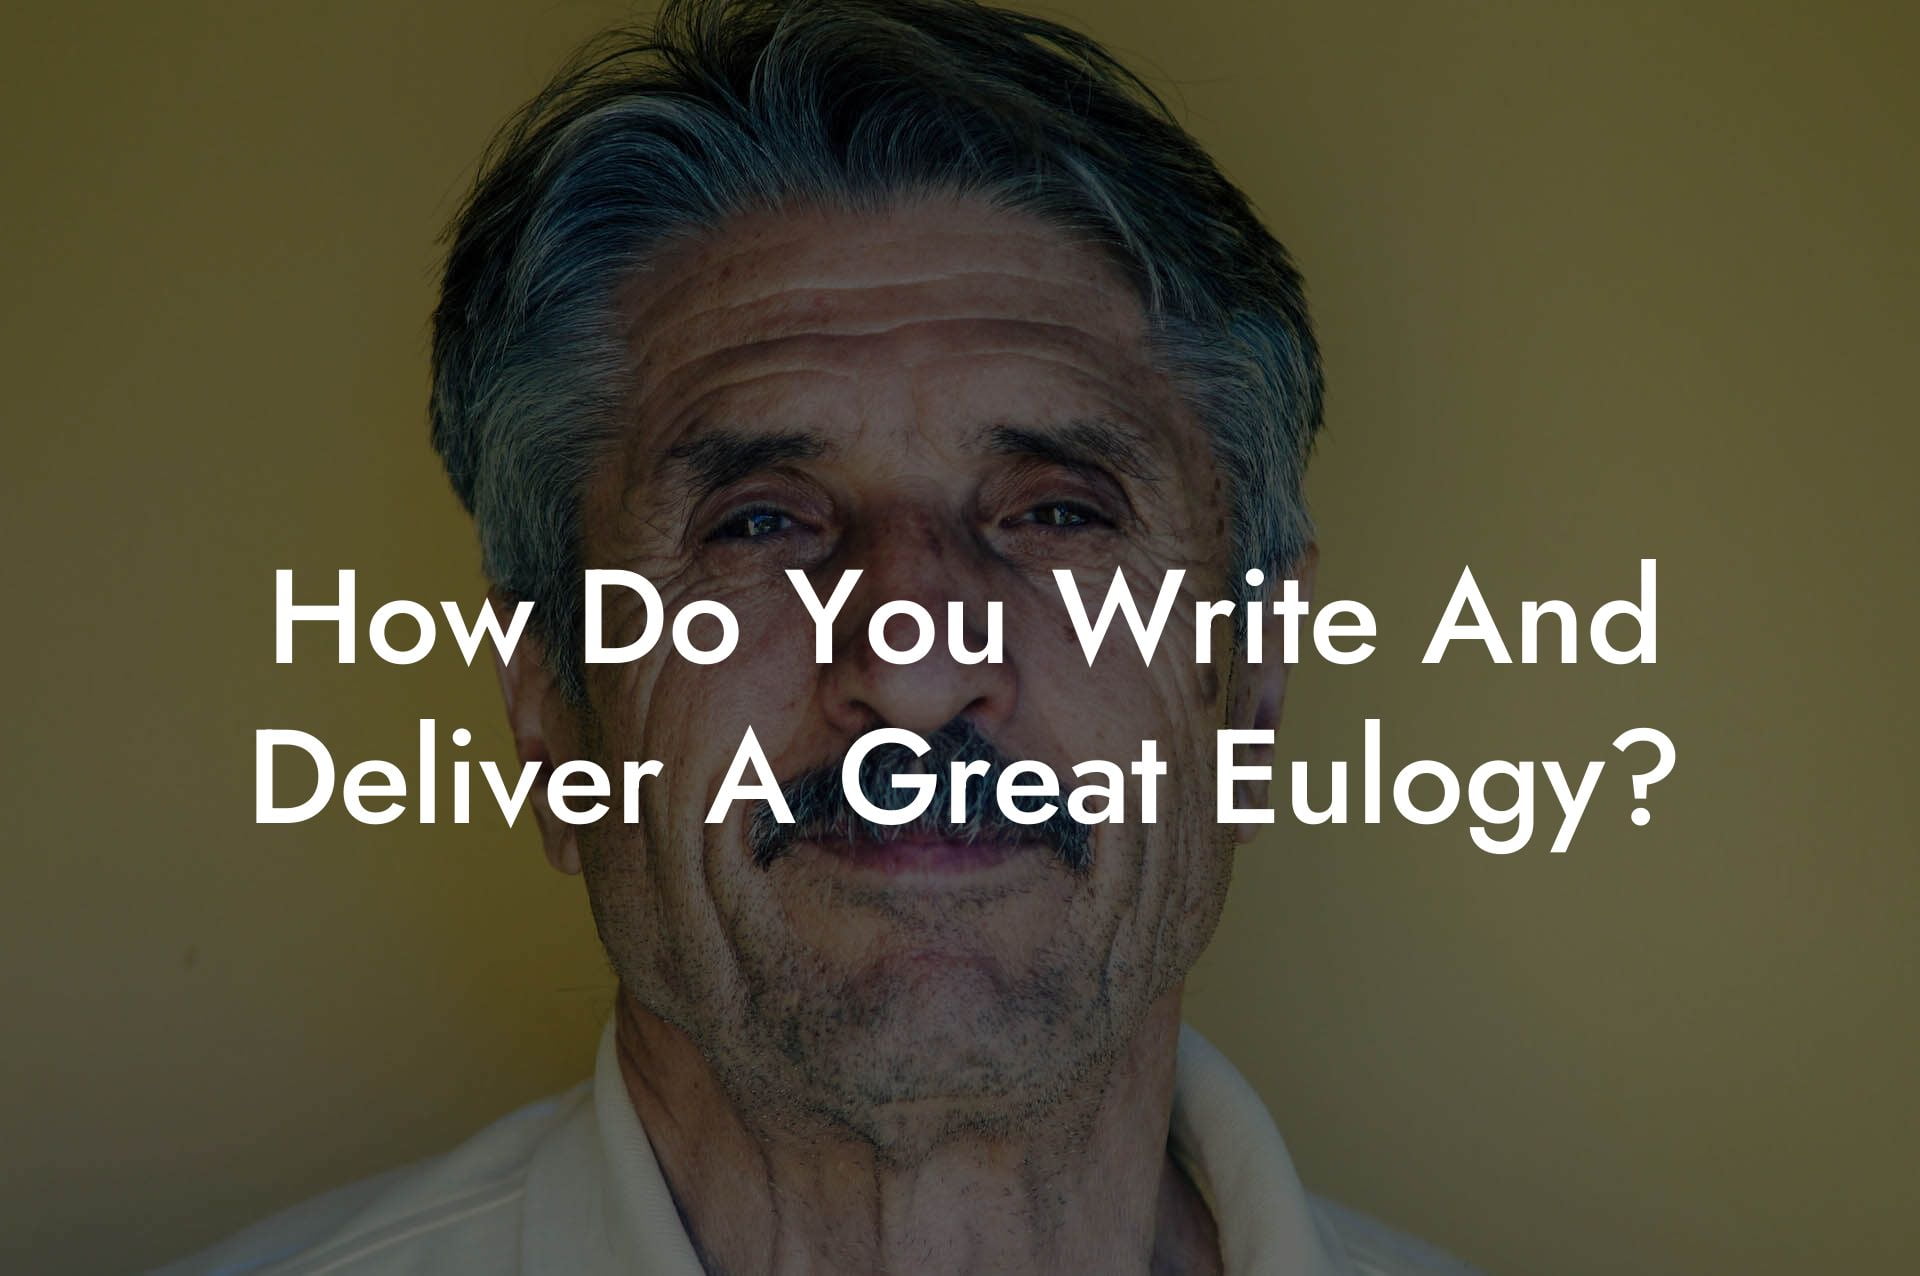 How Do You Write And Deliver A Great Eulogy?